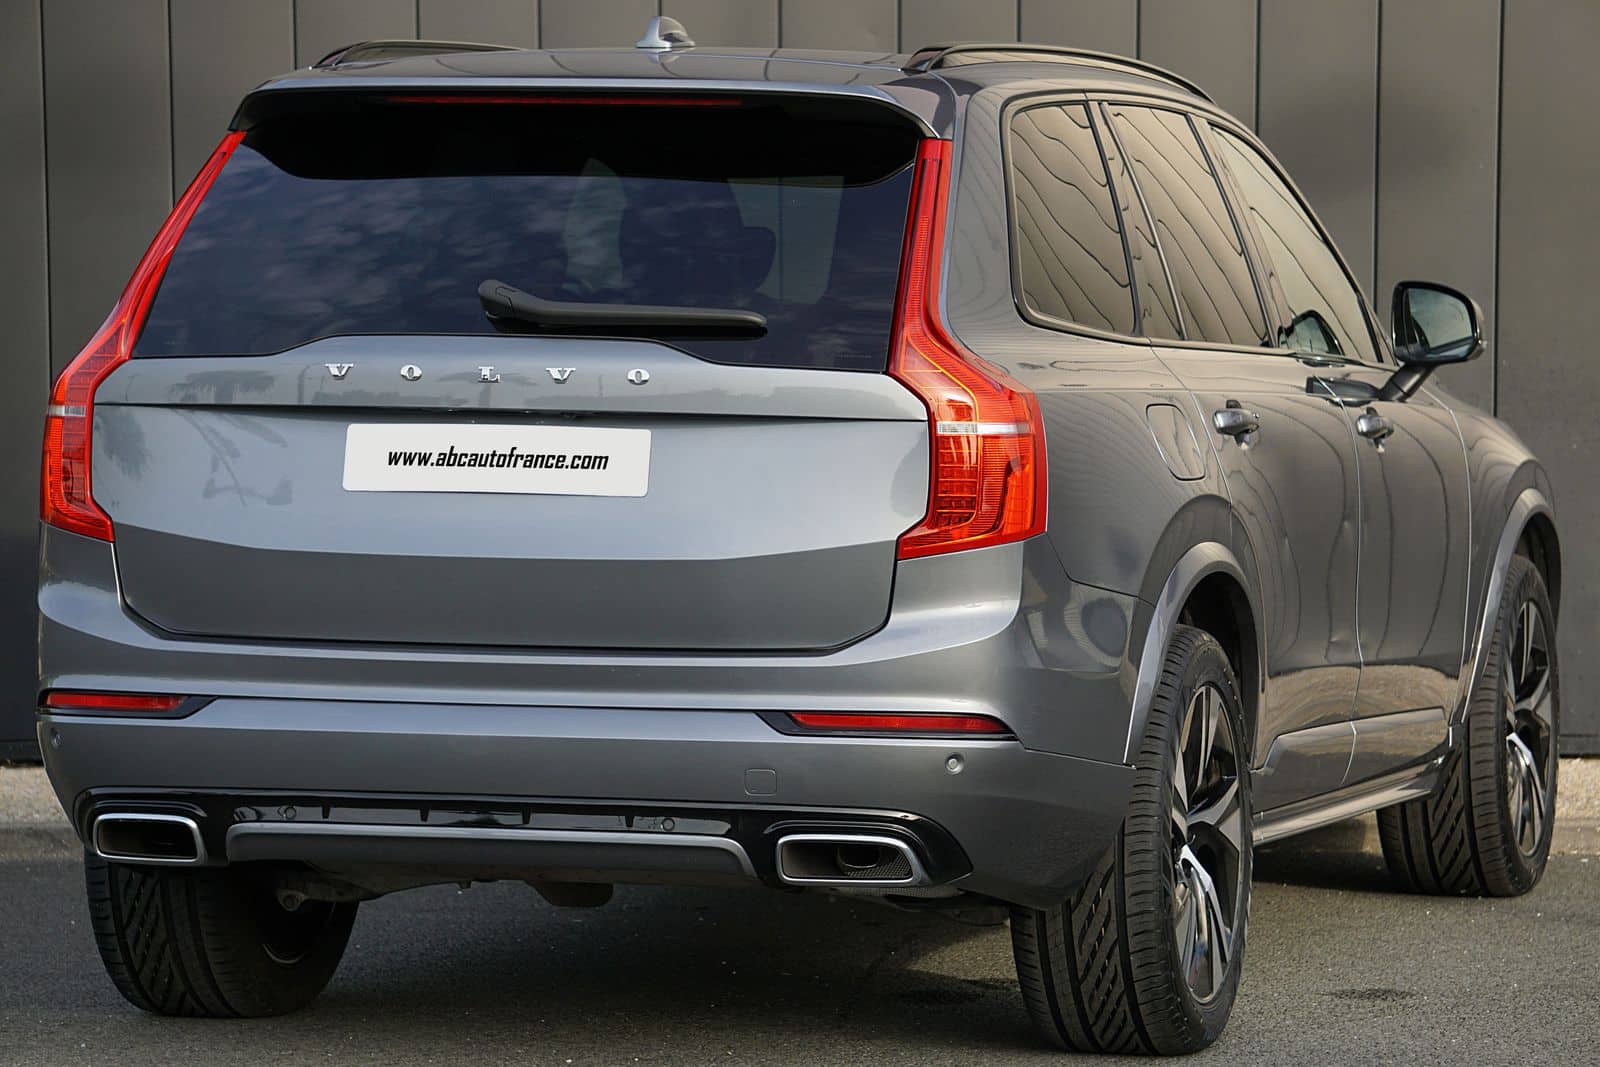 VOLVO XC90 (II) Phase II B5 AWD 235 CV R-Design Geartronic 5 places Occasion 79 abcautofrance (abc auto france) 8